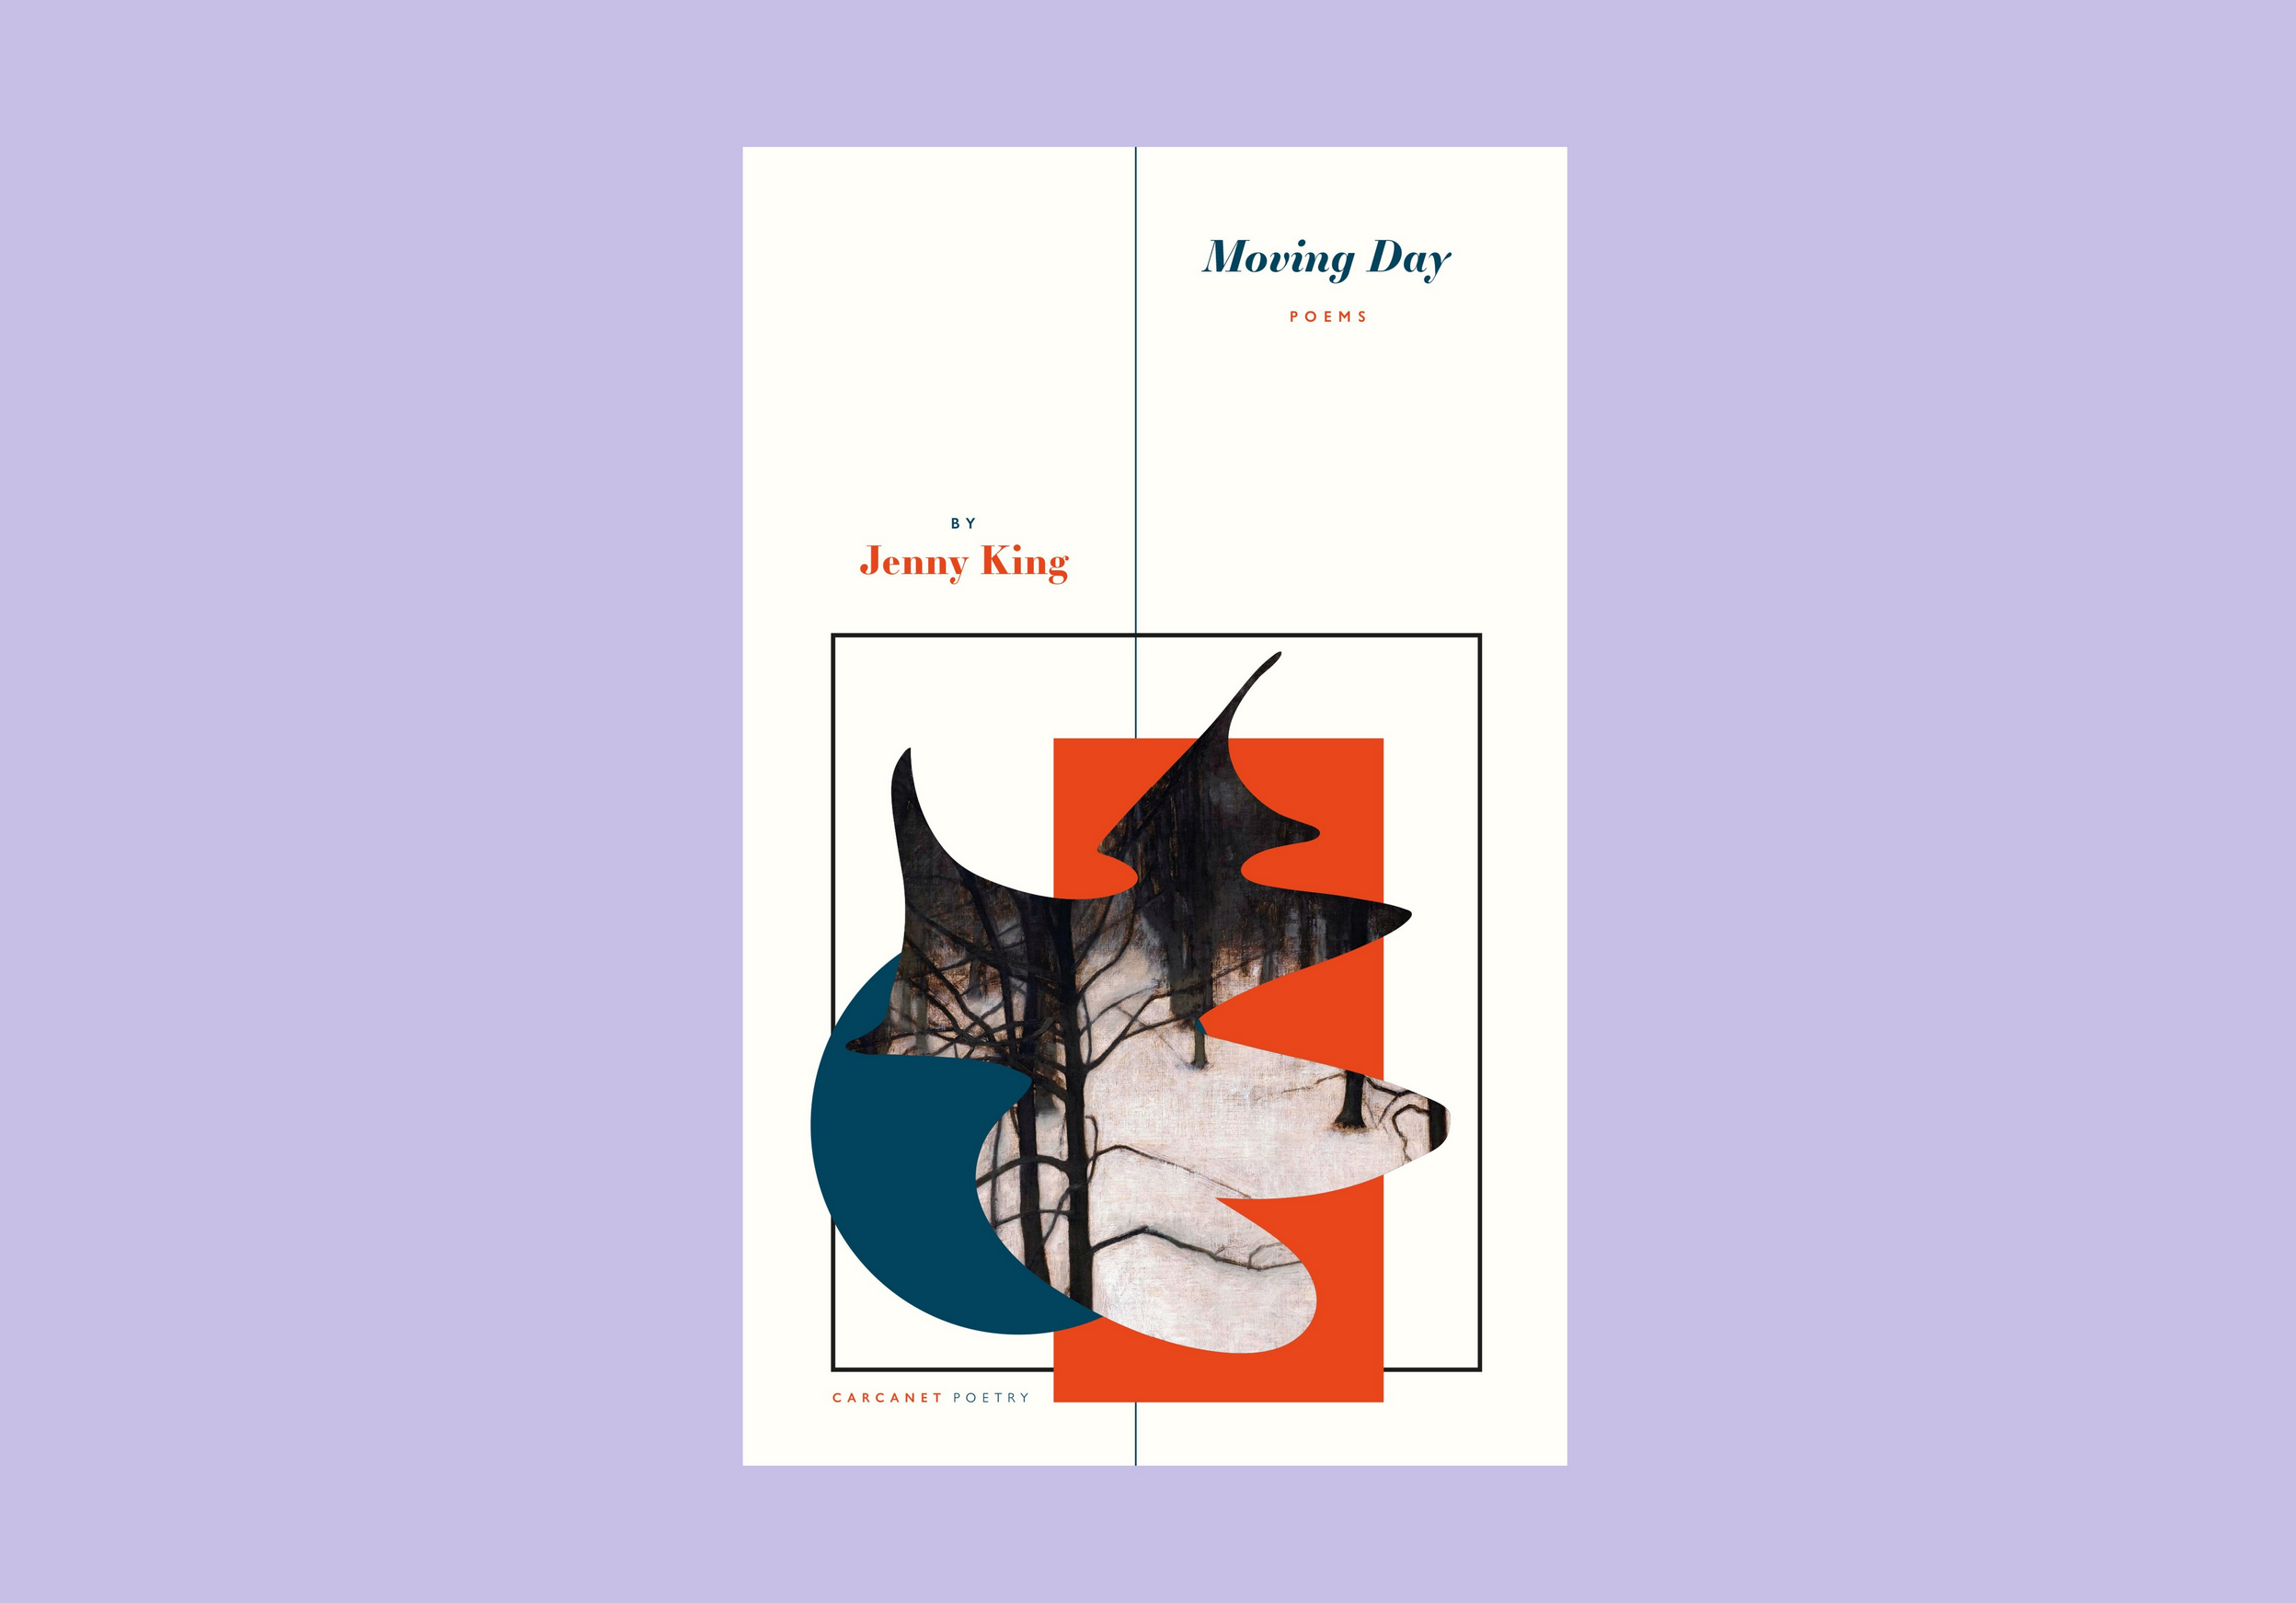 On ‘Moving Day’ by Jenny King